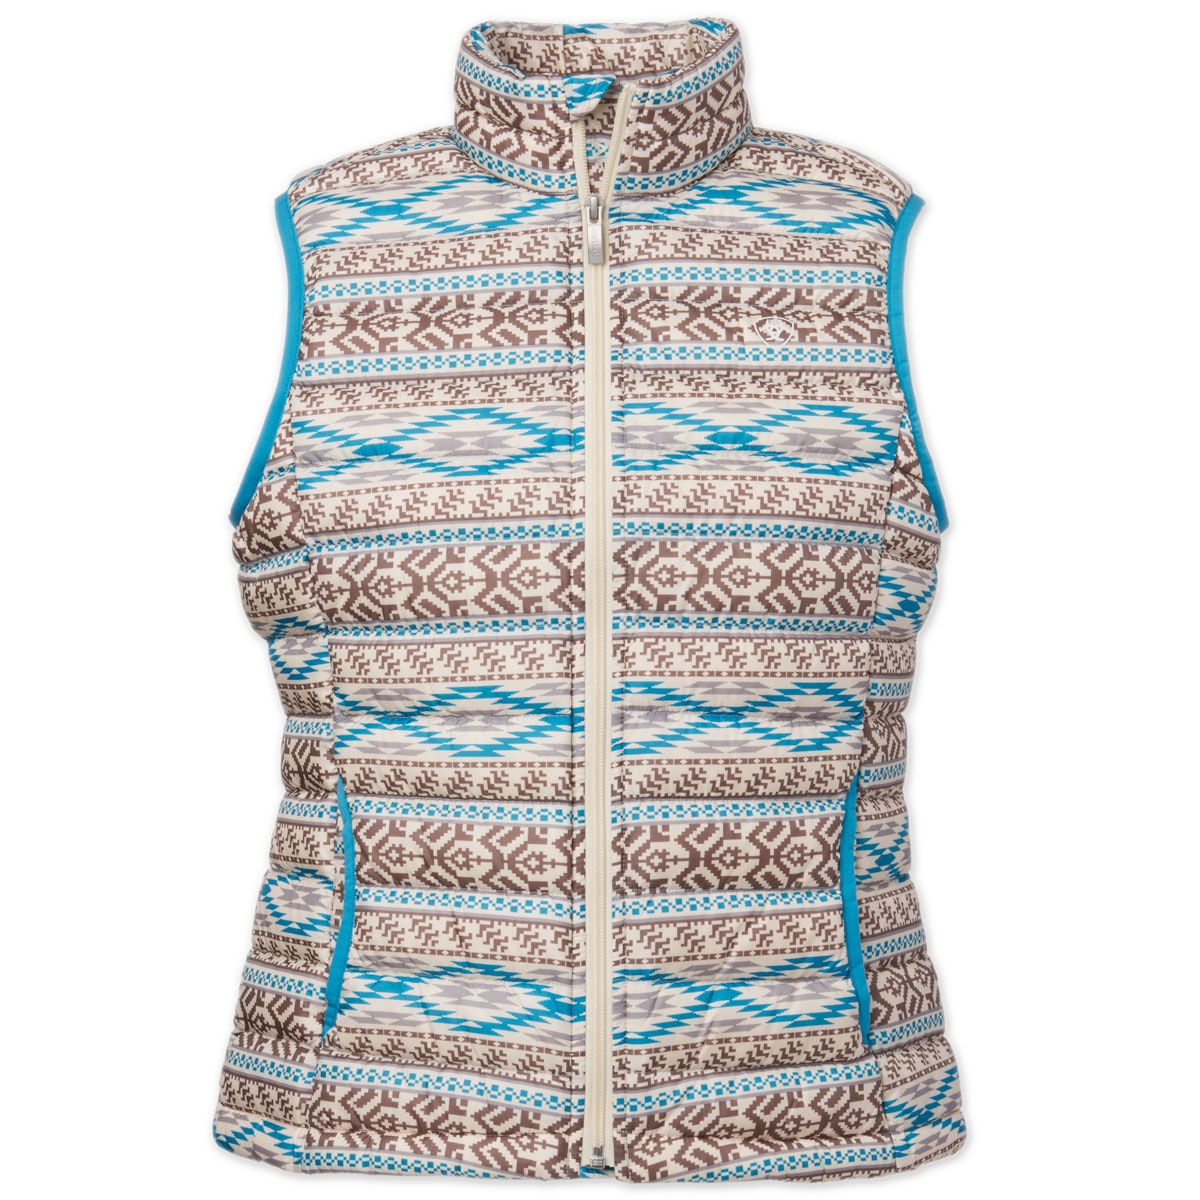 ariat women's vests clearance